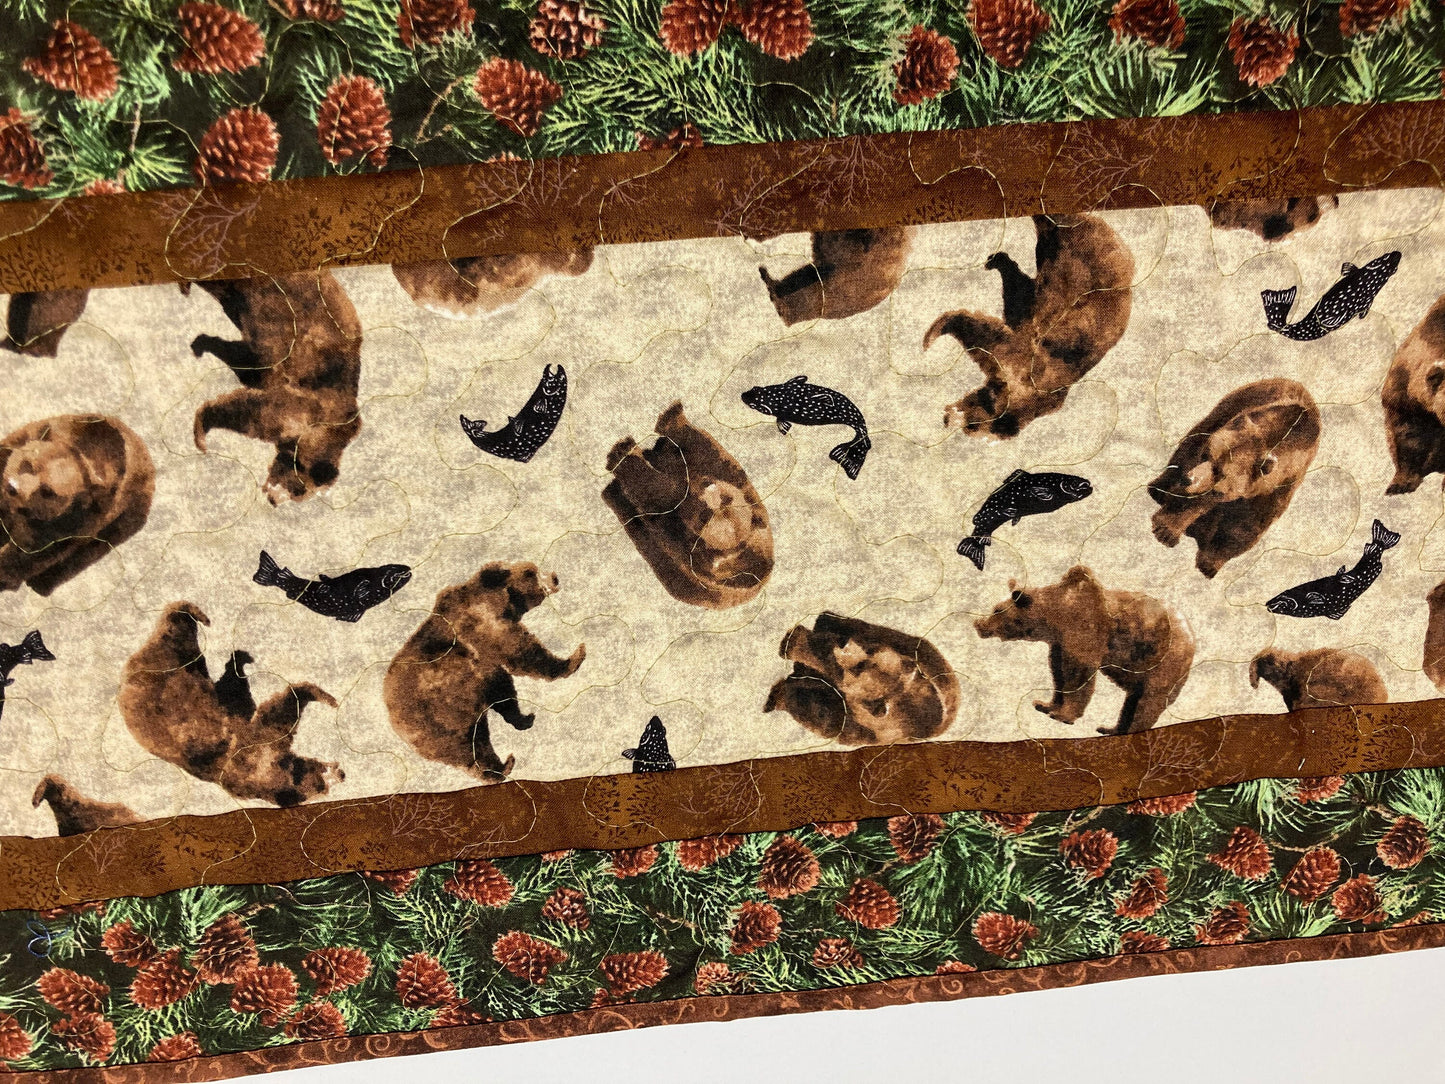 Brown Bear Fish Quilted Table Runner, Wide 13x48" Dining Room Coffee End Table, Cabin Rustic Woods Lodge Decor, Leaves Pine Cones Reversible